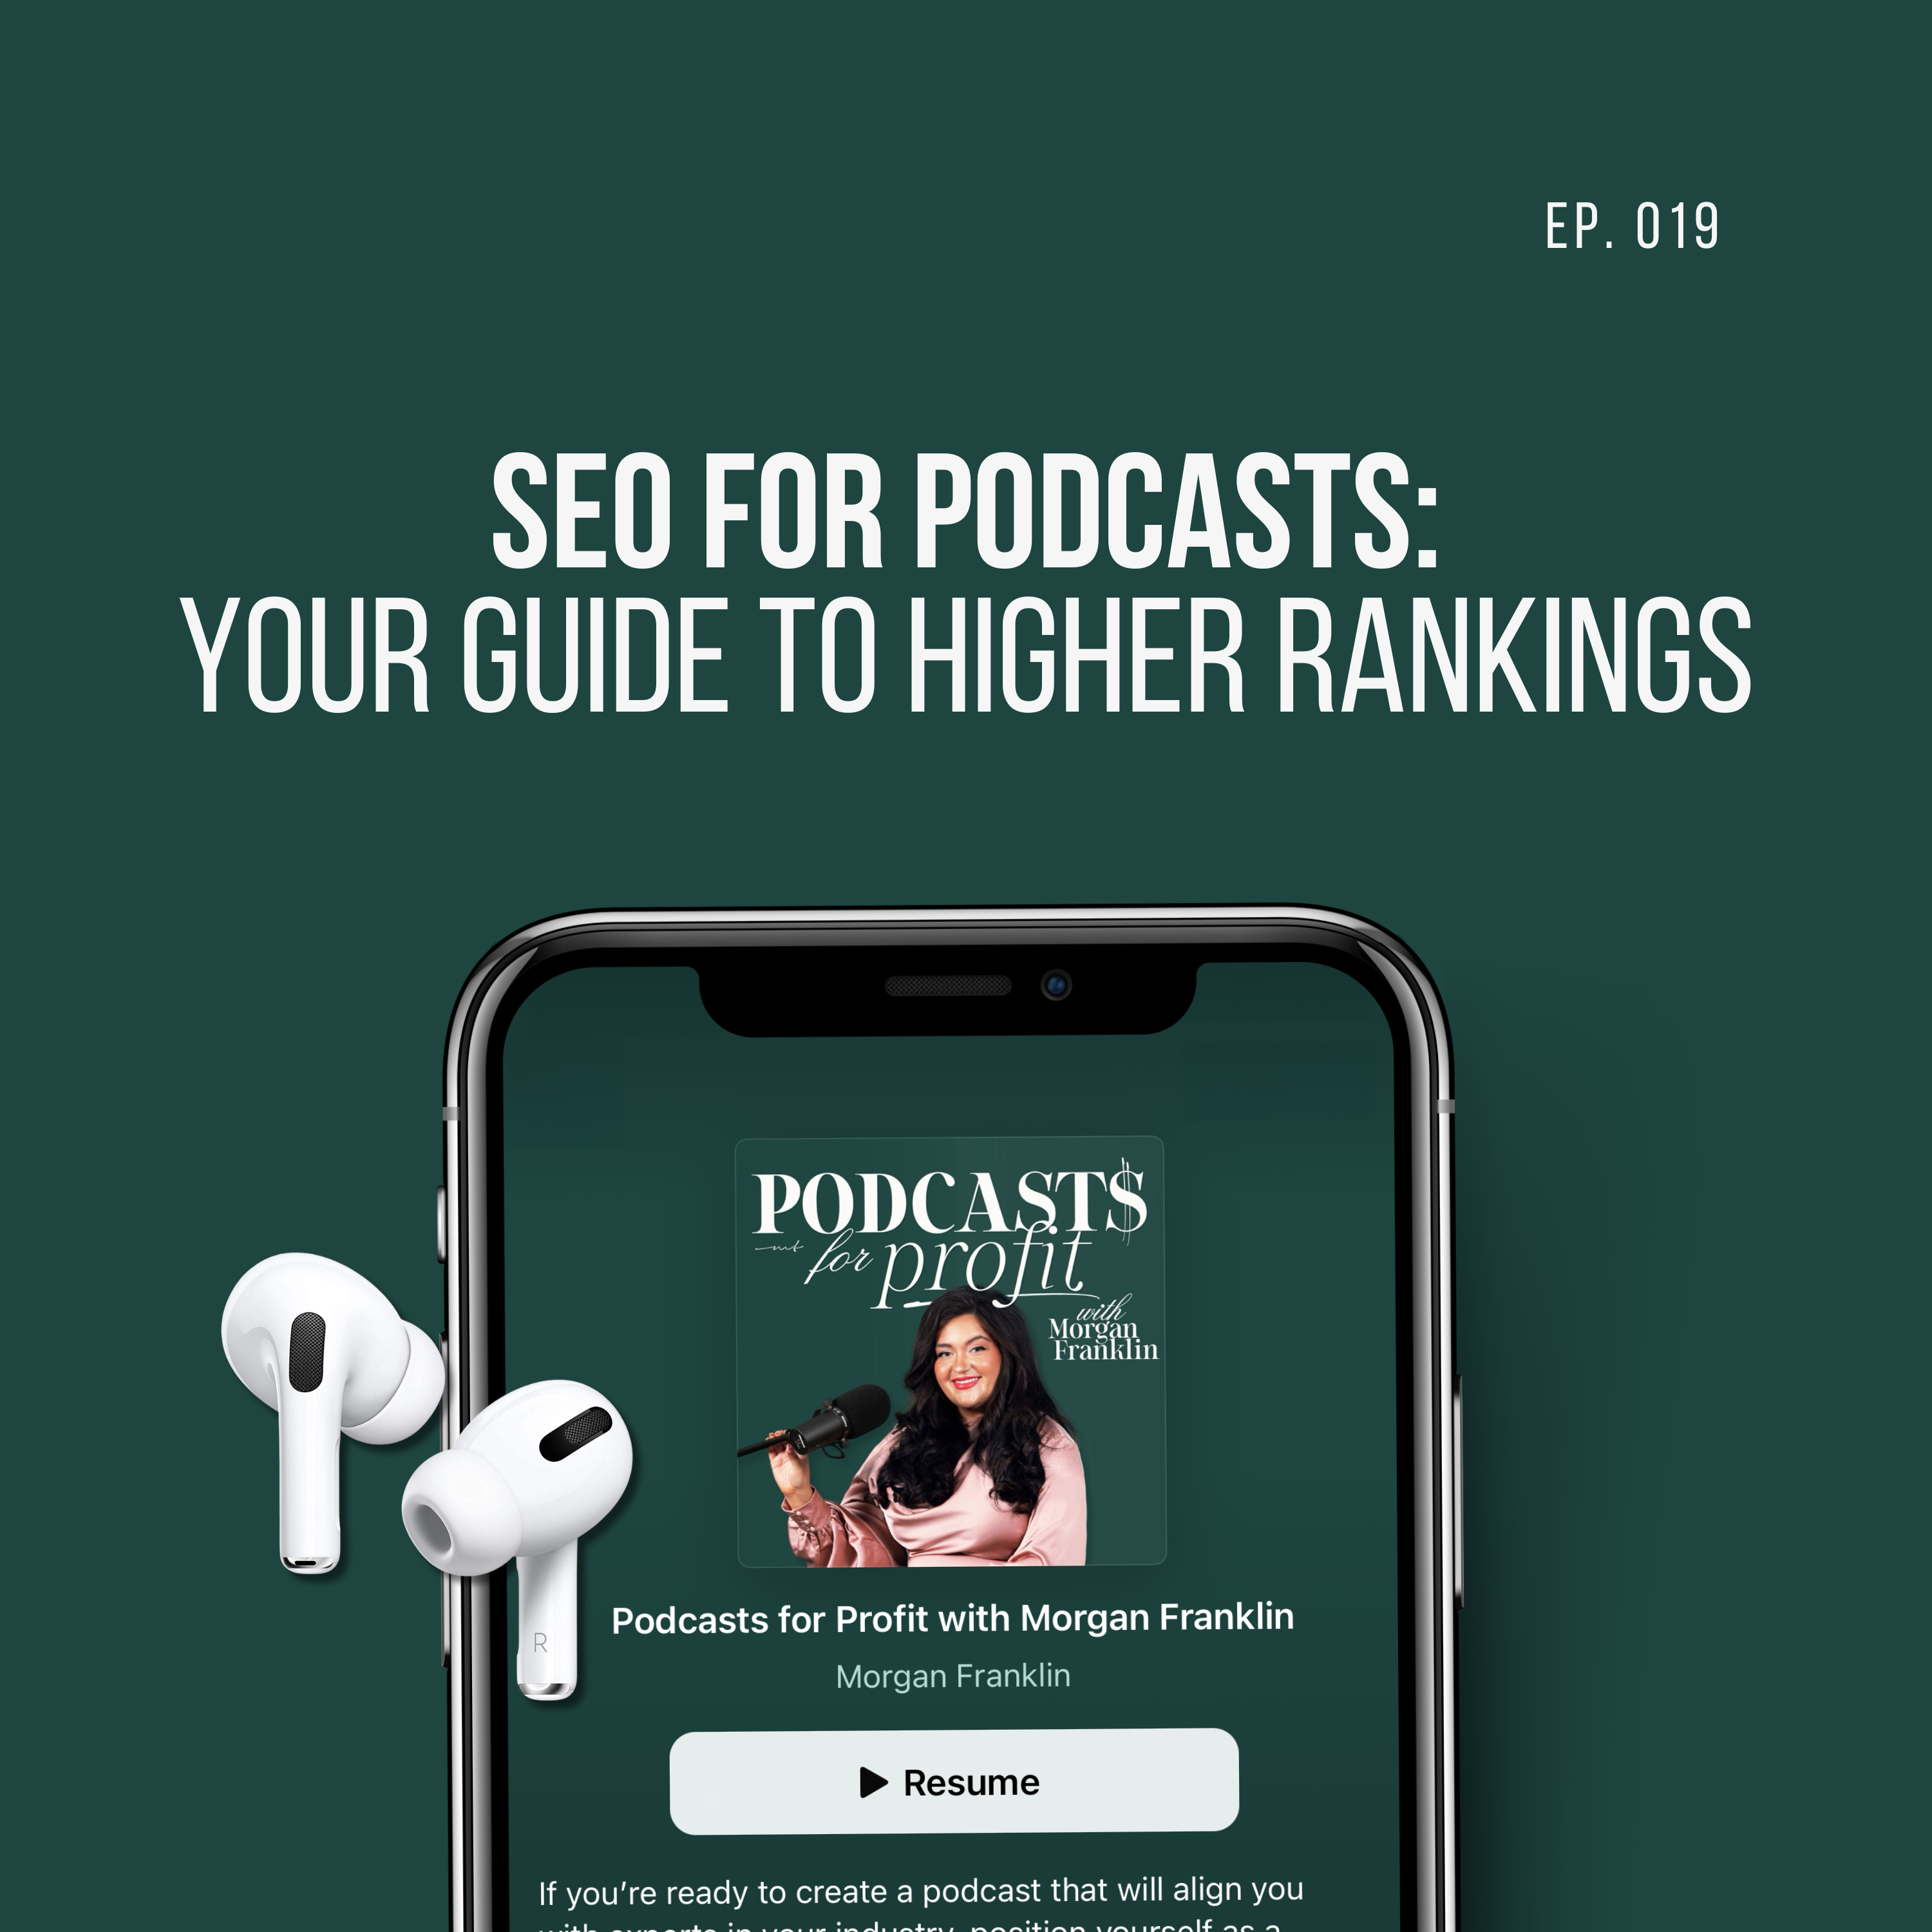 SEO for Podcasts: How to Rank Higher with Your Podcast